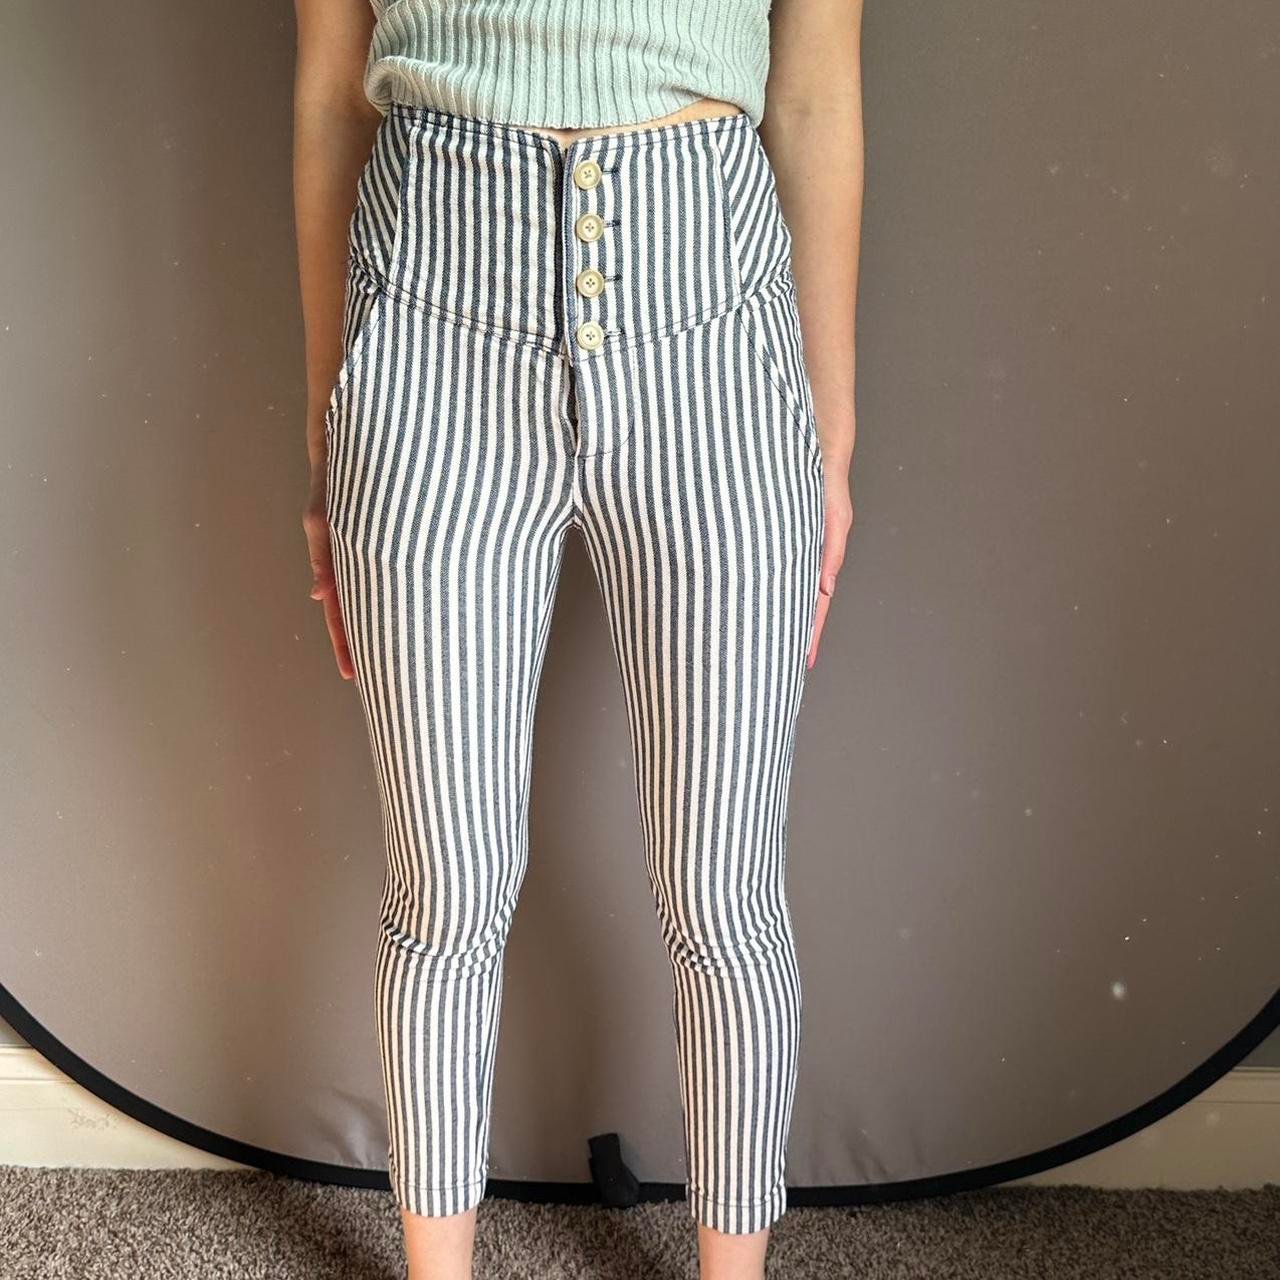 Authentic Free People Striped high-waist Pants fWuhs3H6M just for you